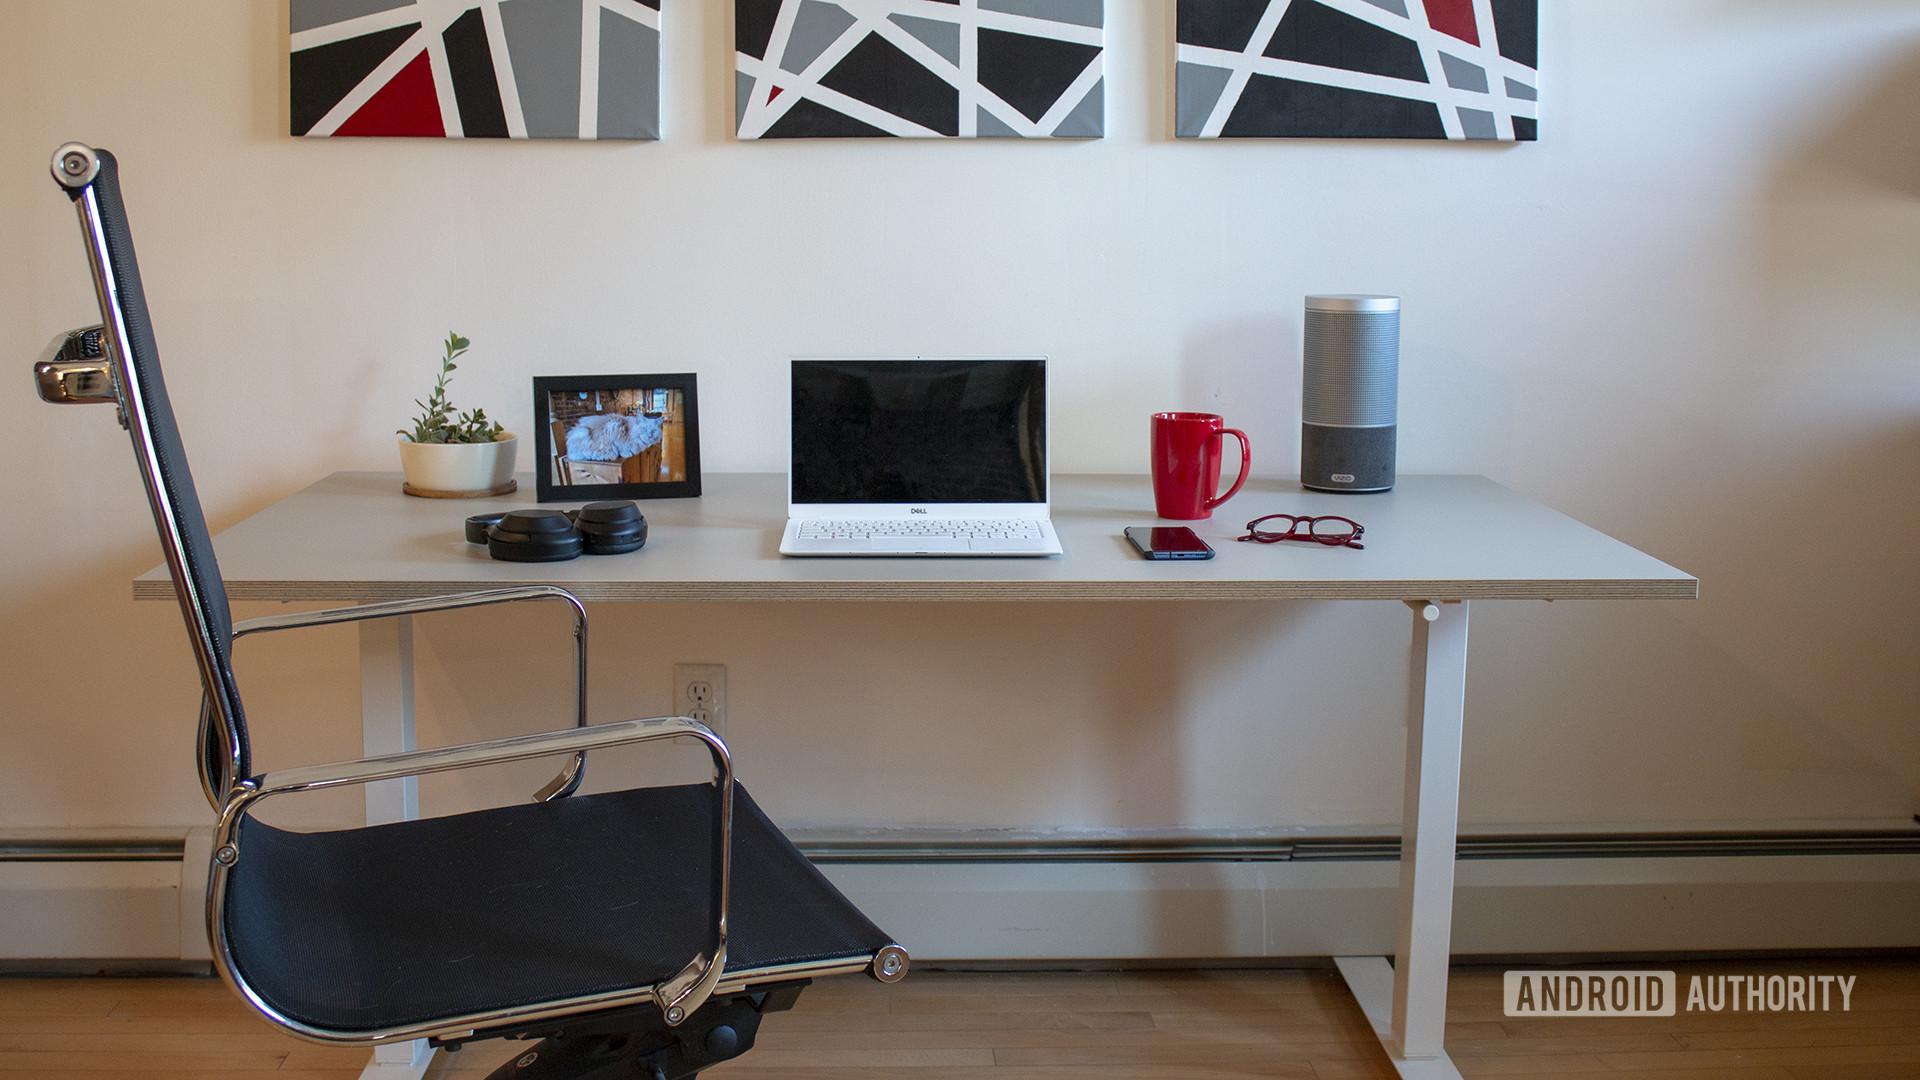 Ikea Skarsta Review The Most Basic Of, Ikea Build Your Own Desk Canada